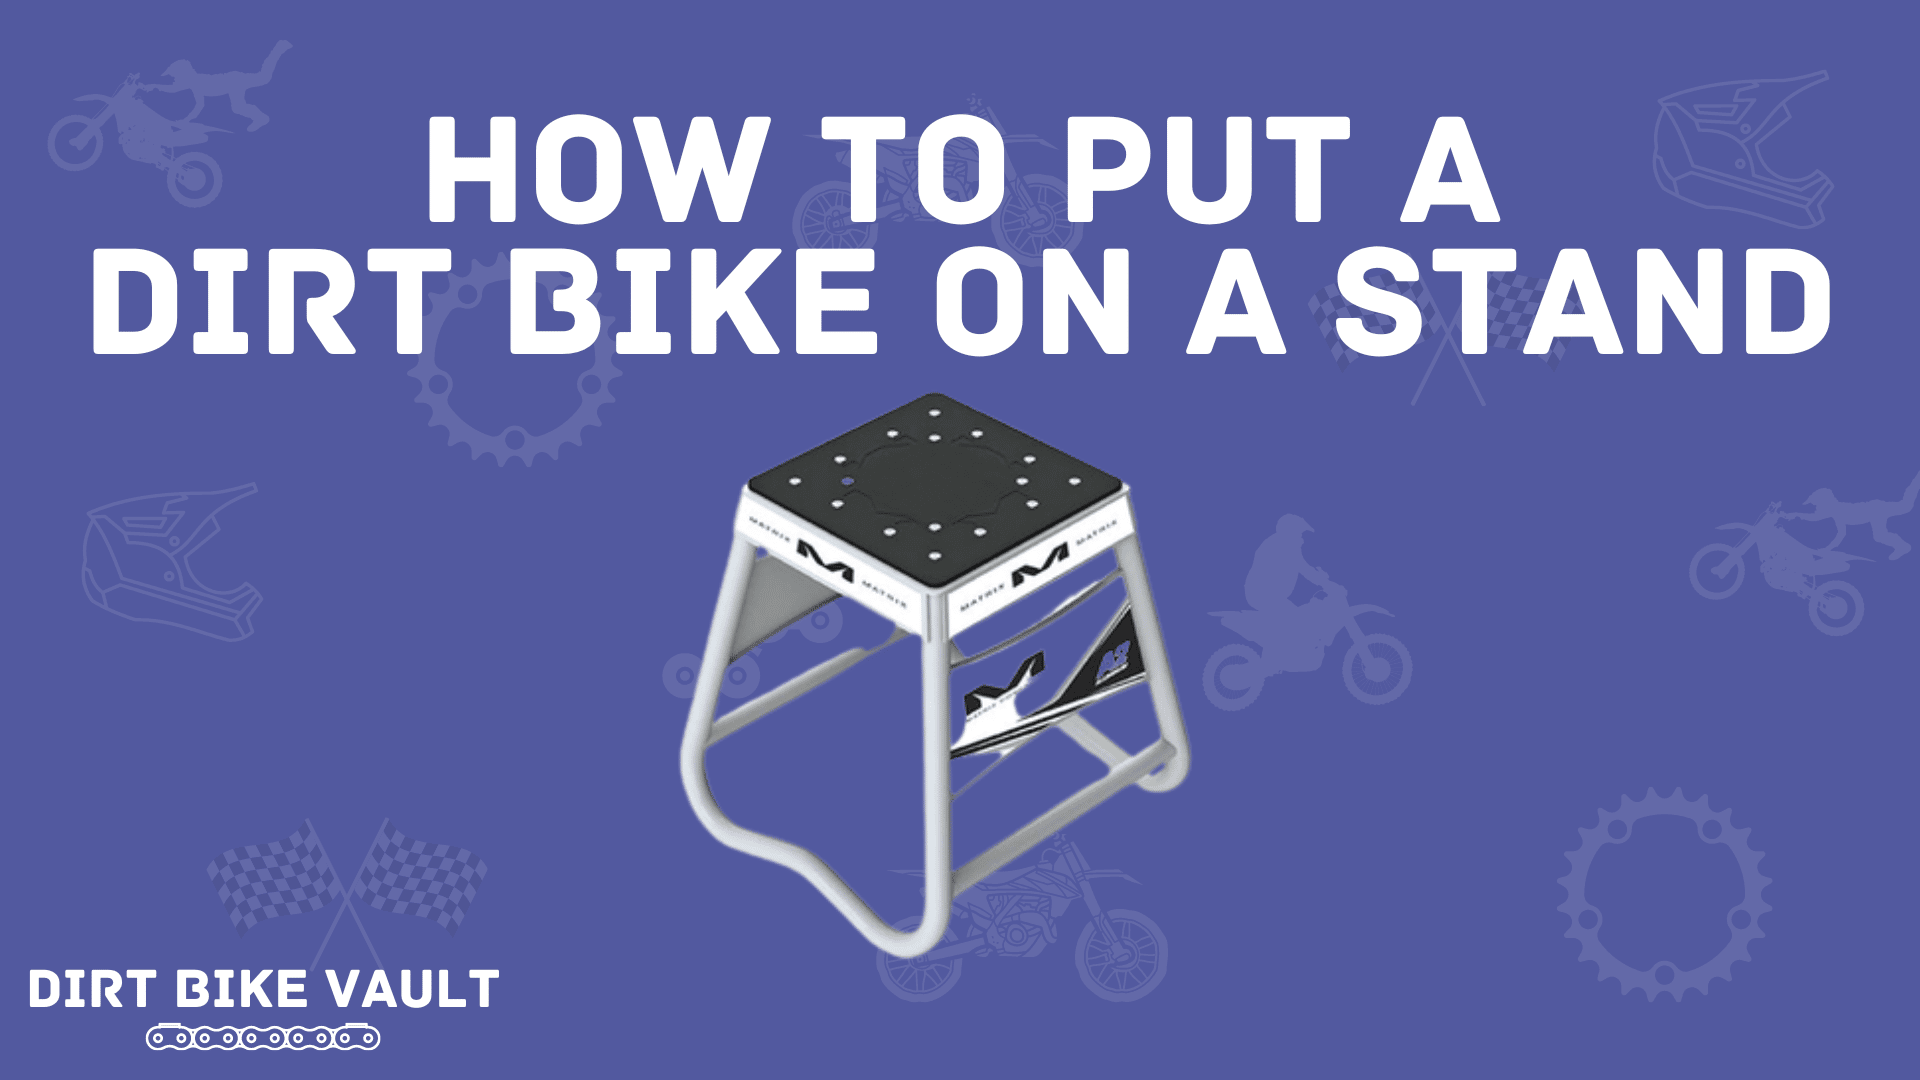 How to put a dirt bike on a stand in white text on a blue background with an image of a white dirt bike stand